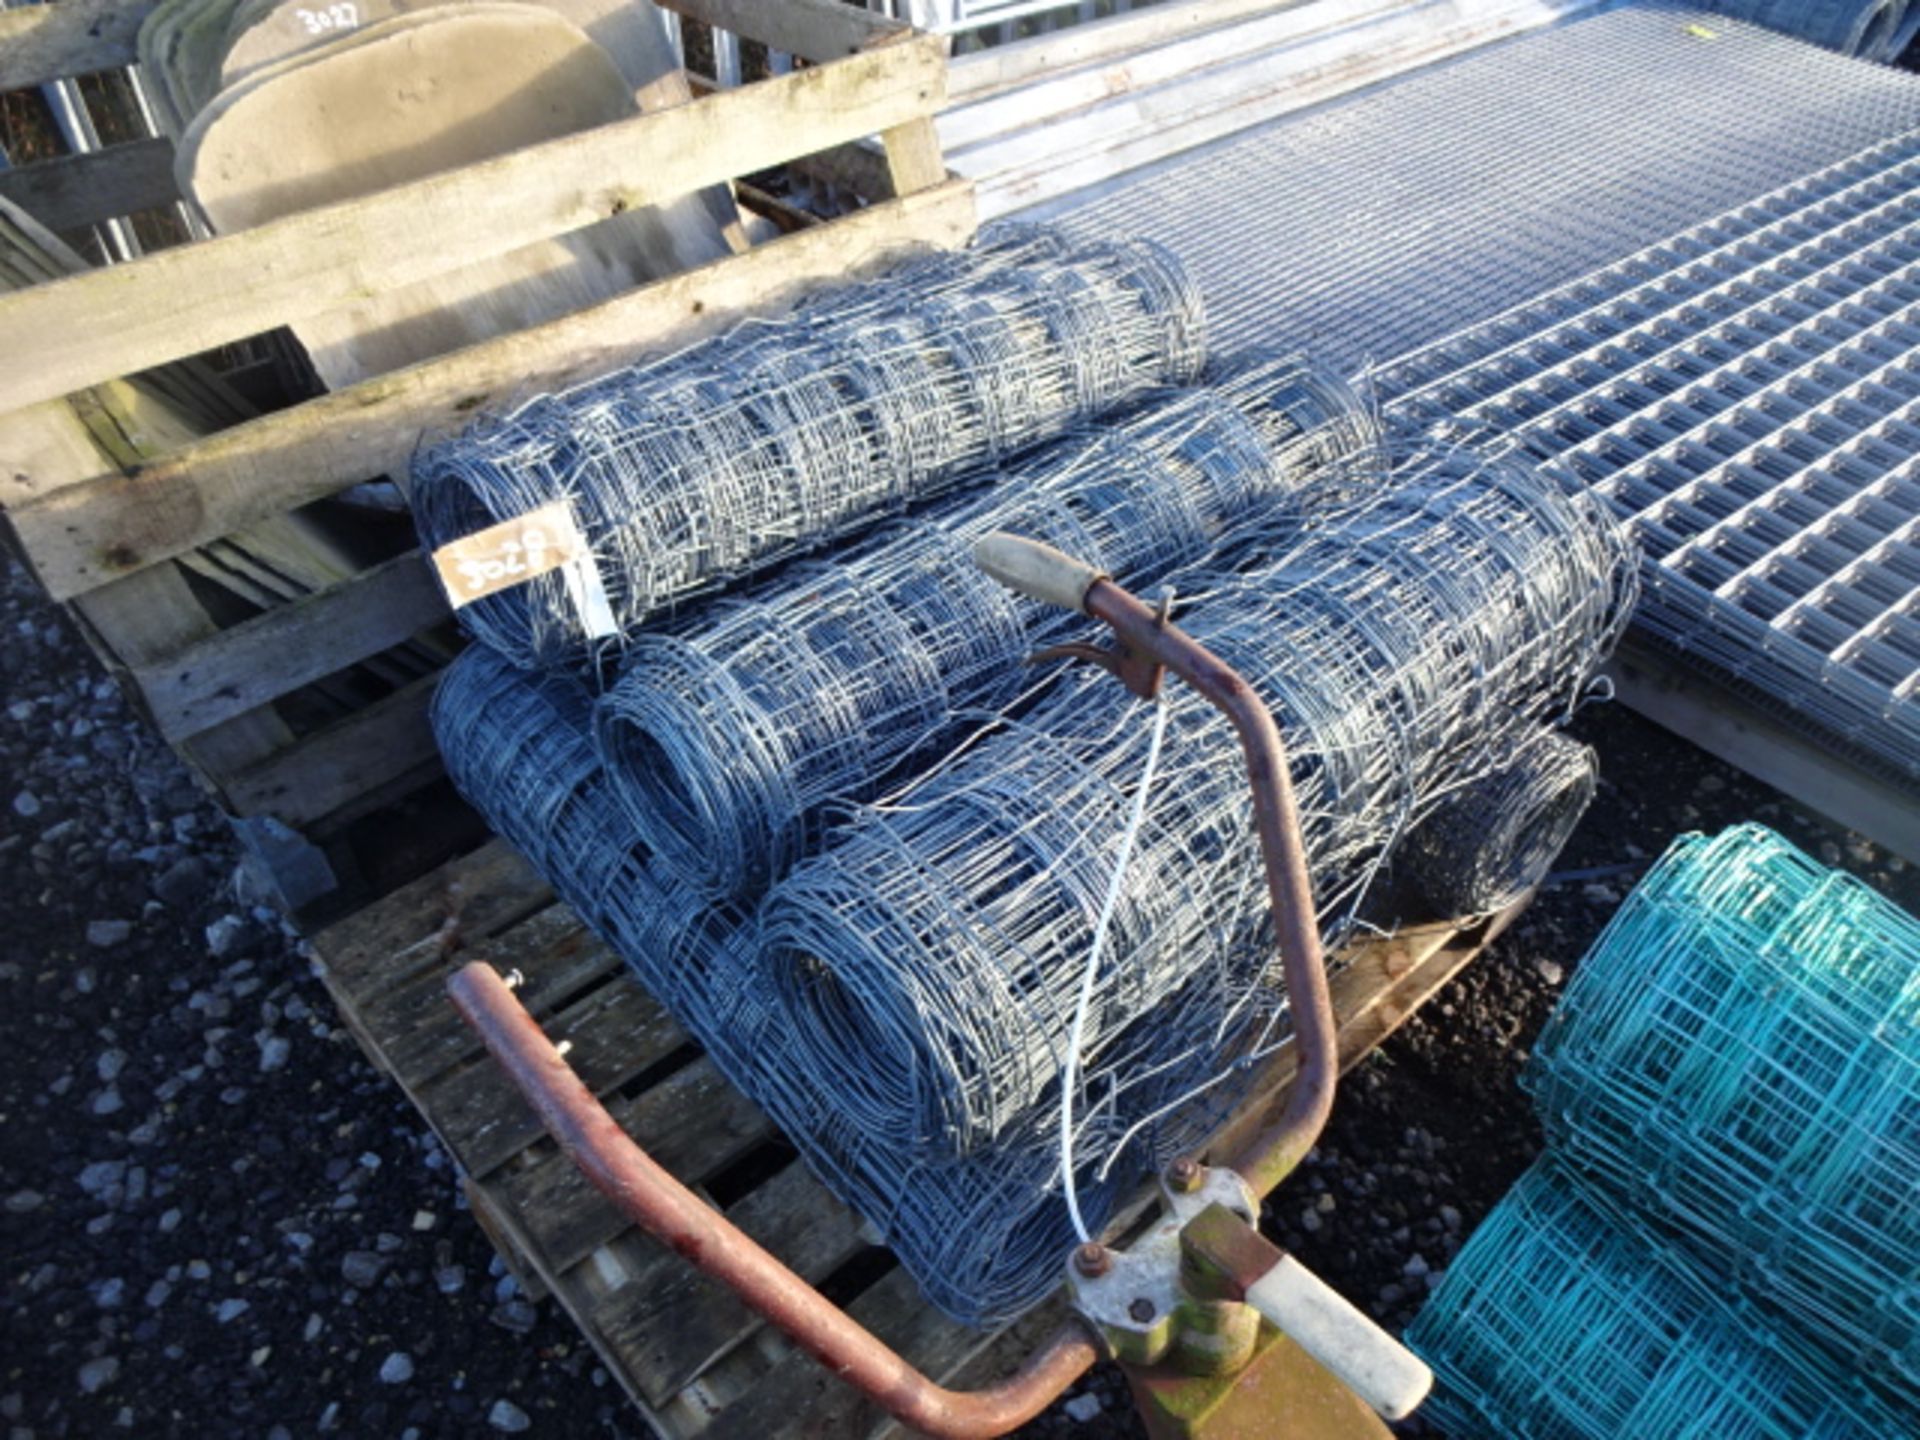 8 x rolls of sheep wire